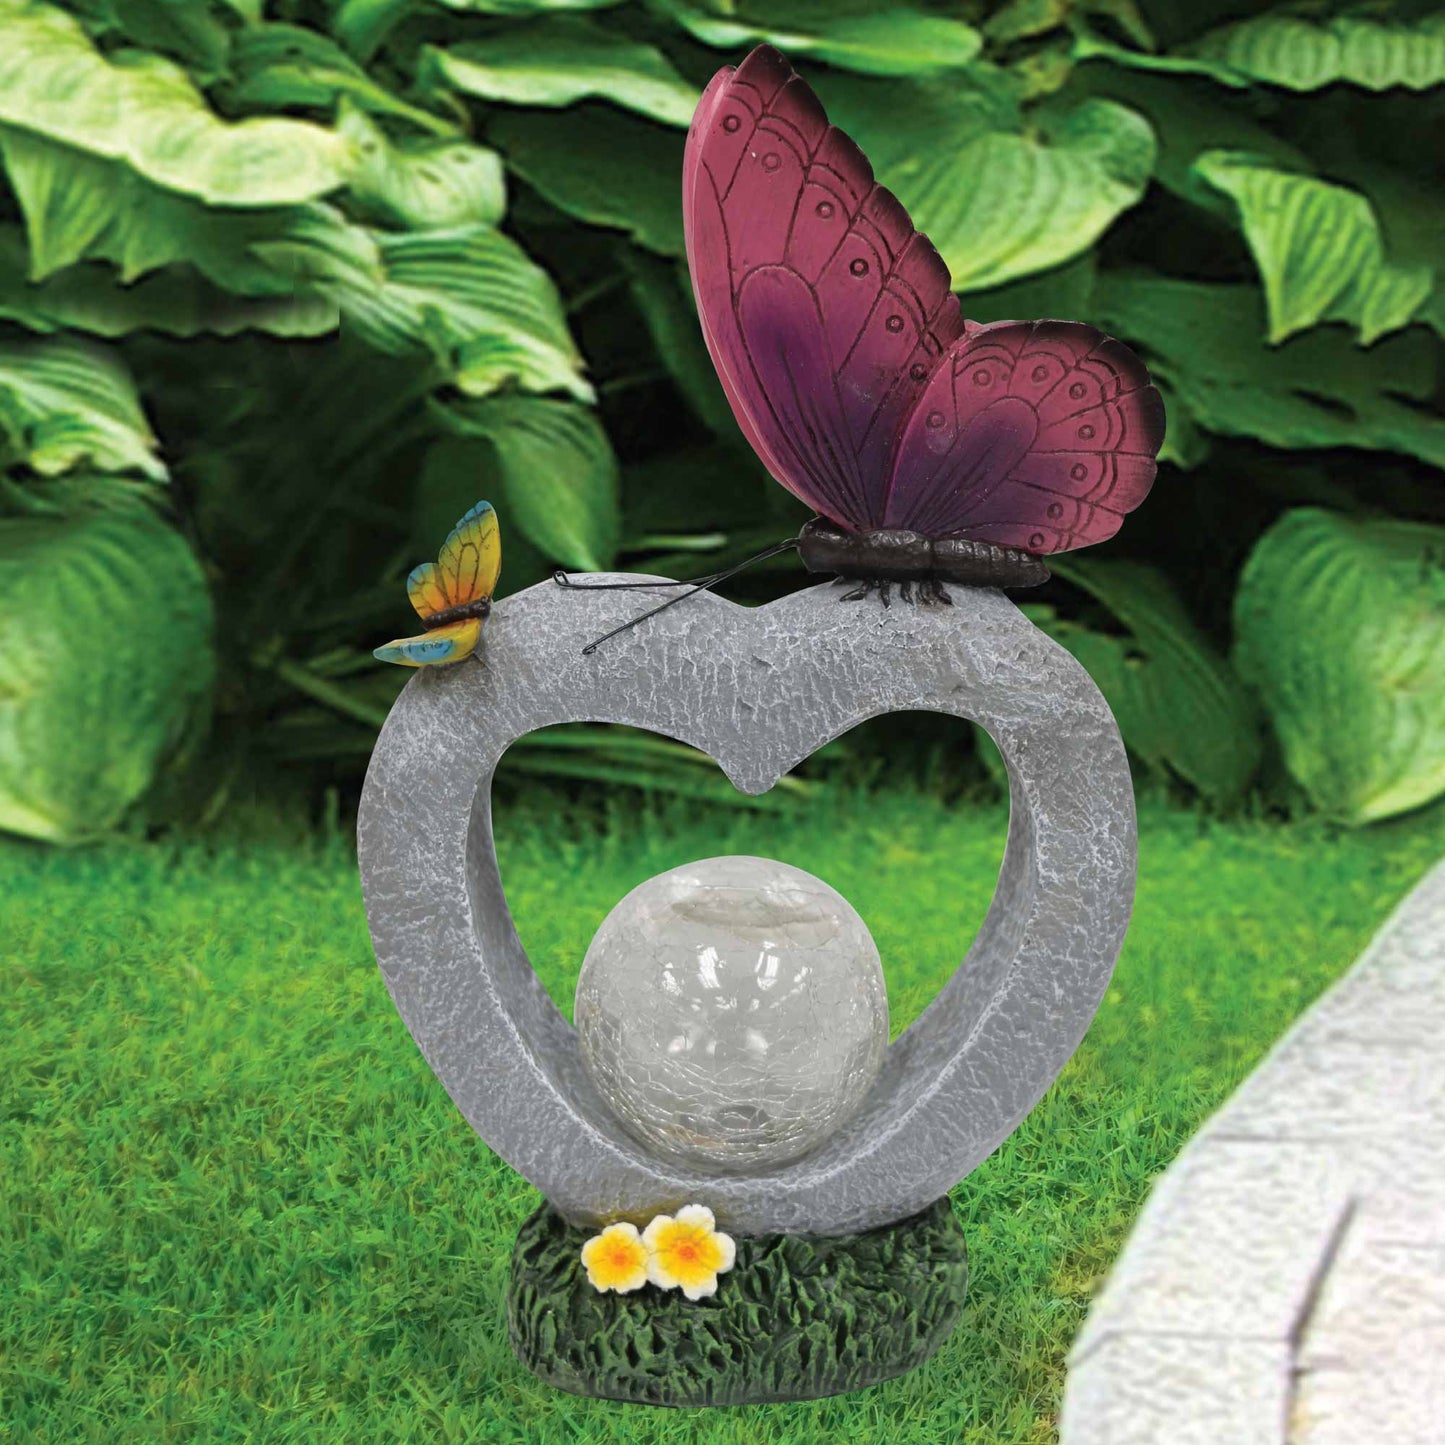 Silver & Stone Outdoor Butterfly Ornament with Solar Crackle Effect Ball - Purple Butterfly